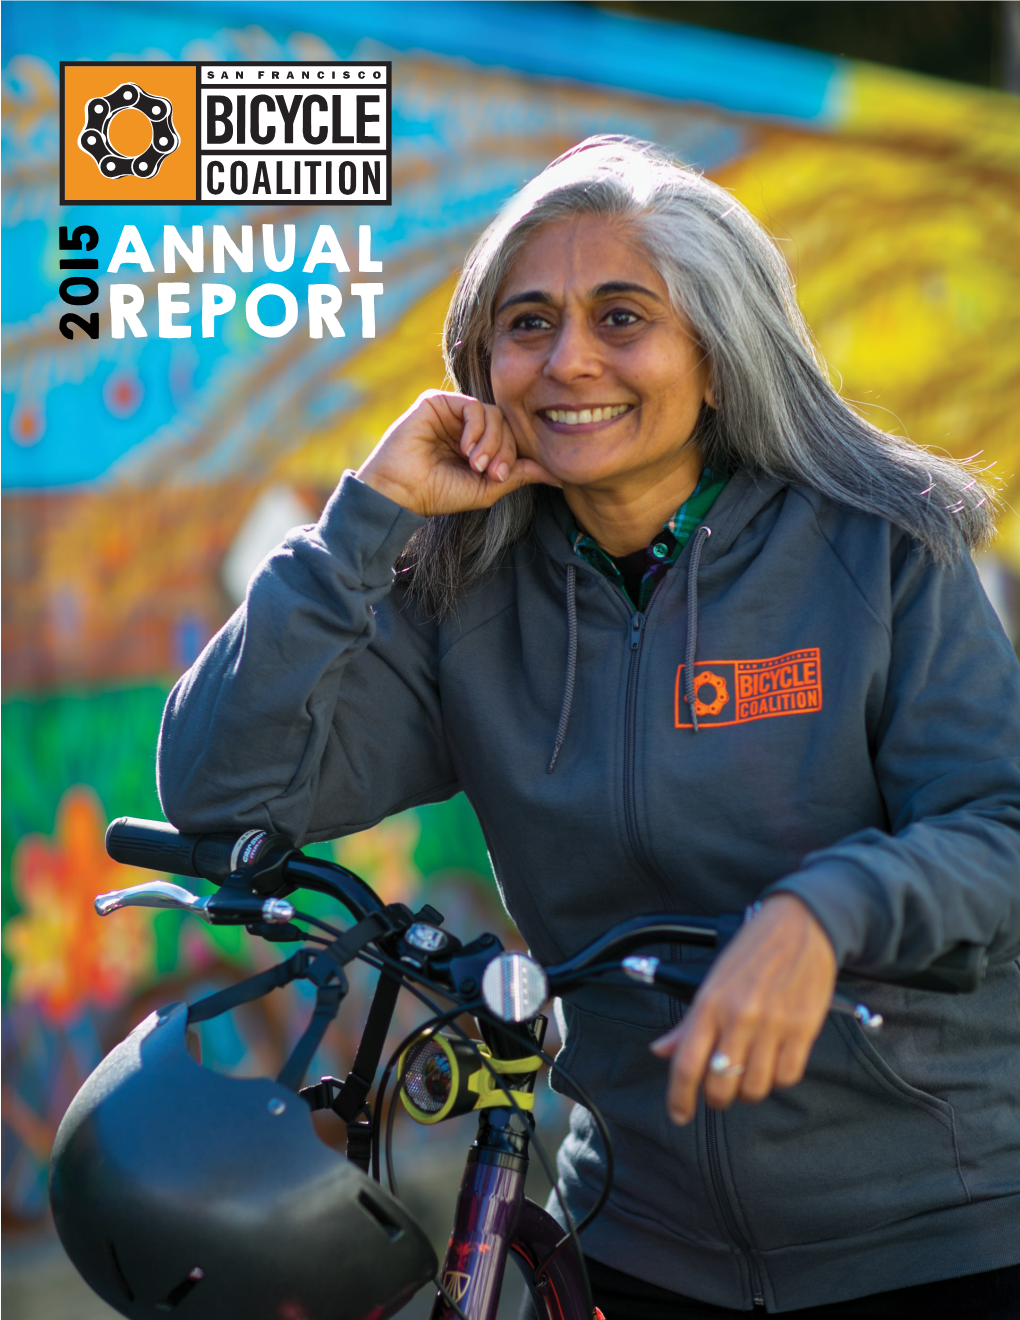 Connect with Your San Francisco Bicycle Coalition!